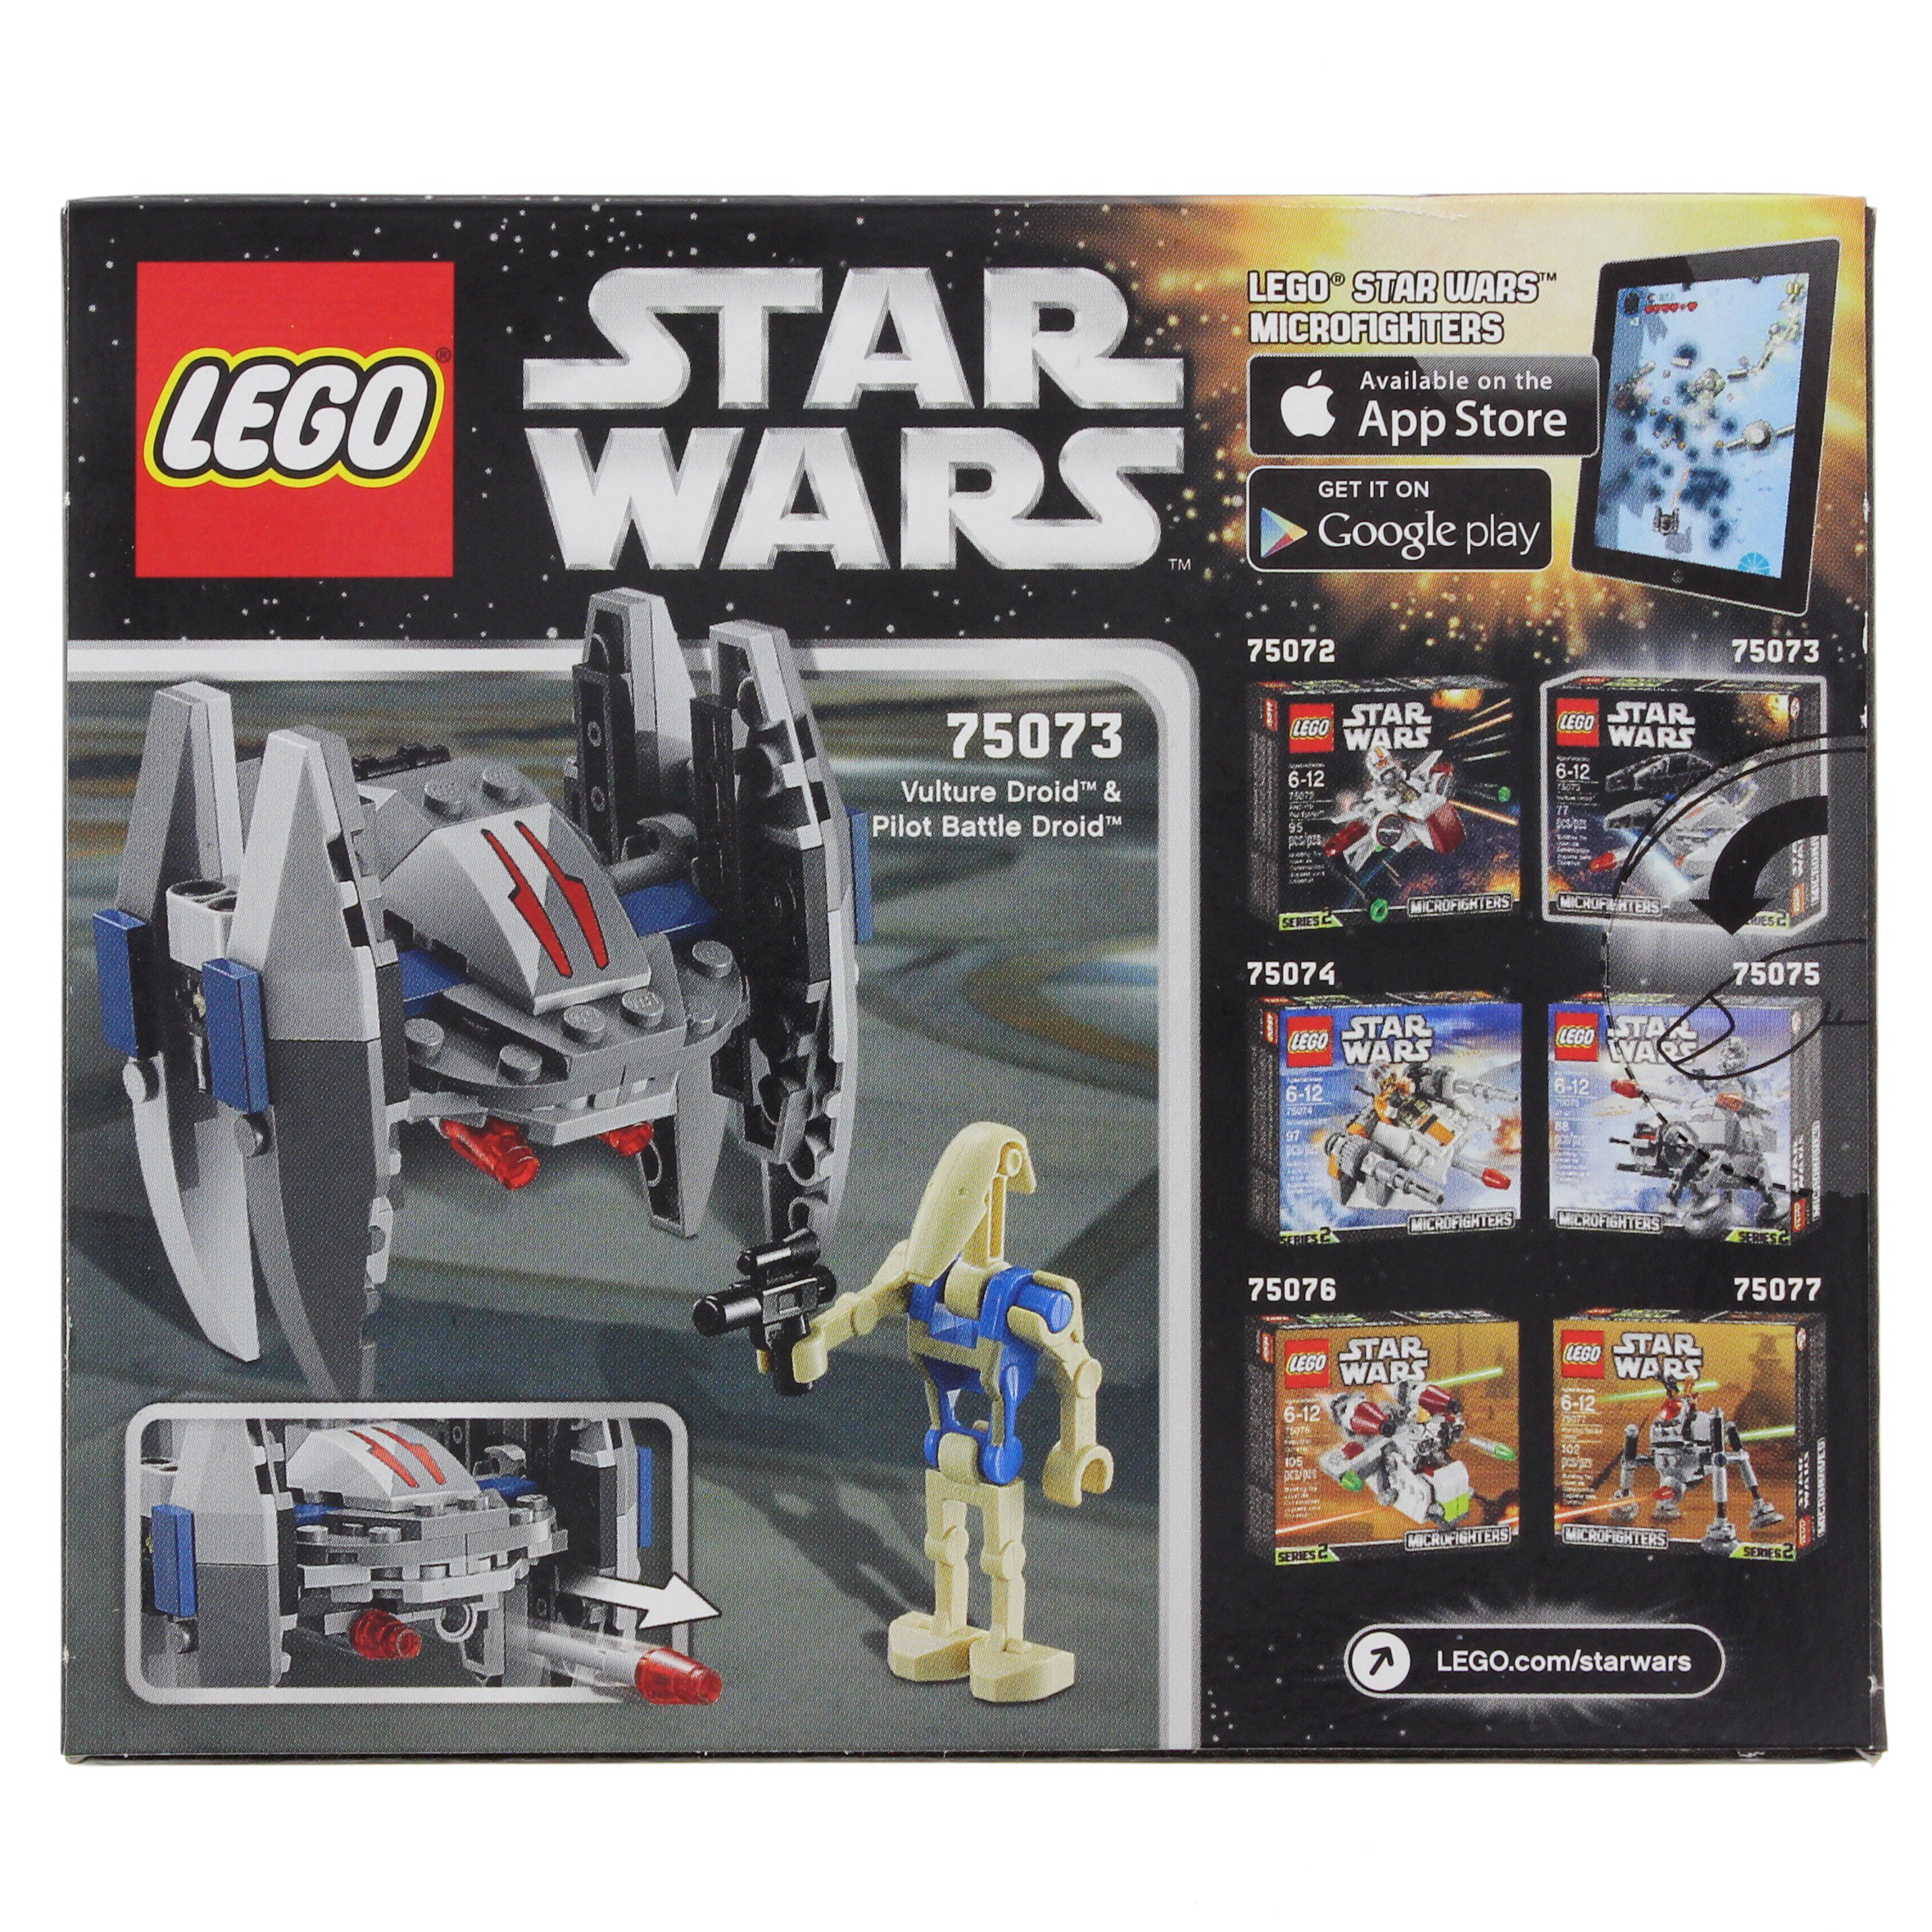 LEGO, Star Wars Microfighters Series 2 Vulture Droid (75073)